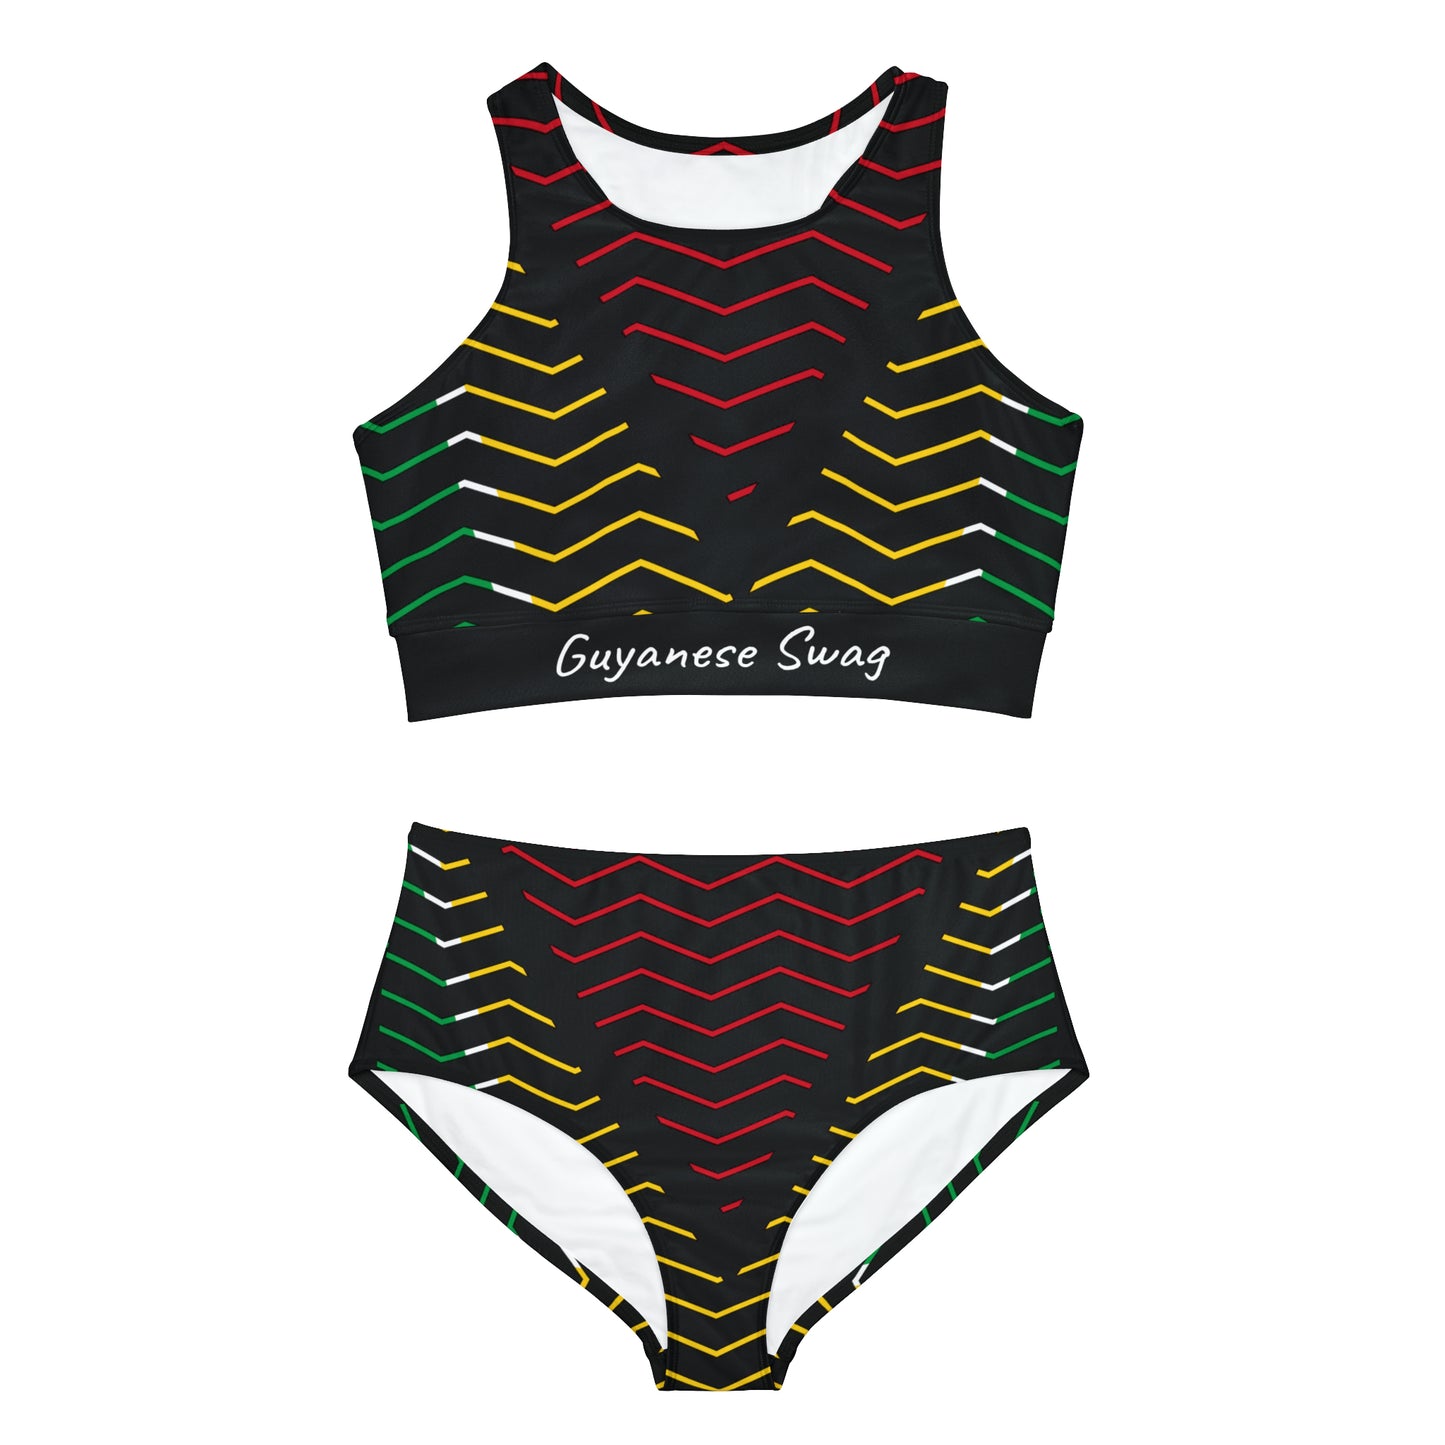 Wavy Artistic Guyana Flag Athletic Sporty Bikini Set for Ultimate Comfort and Style.